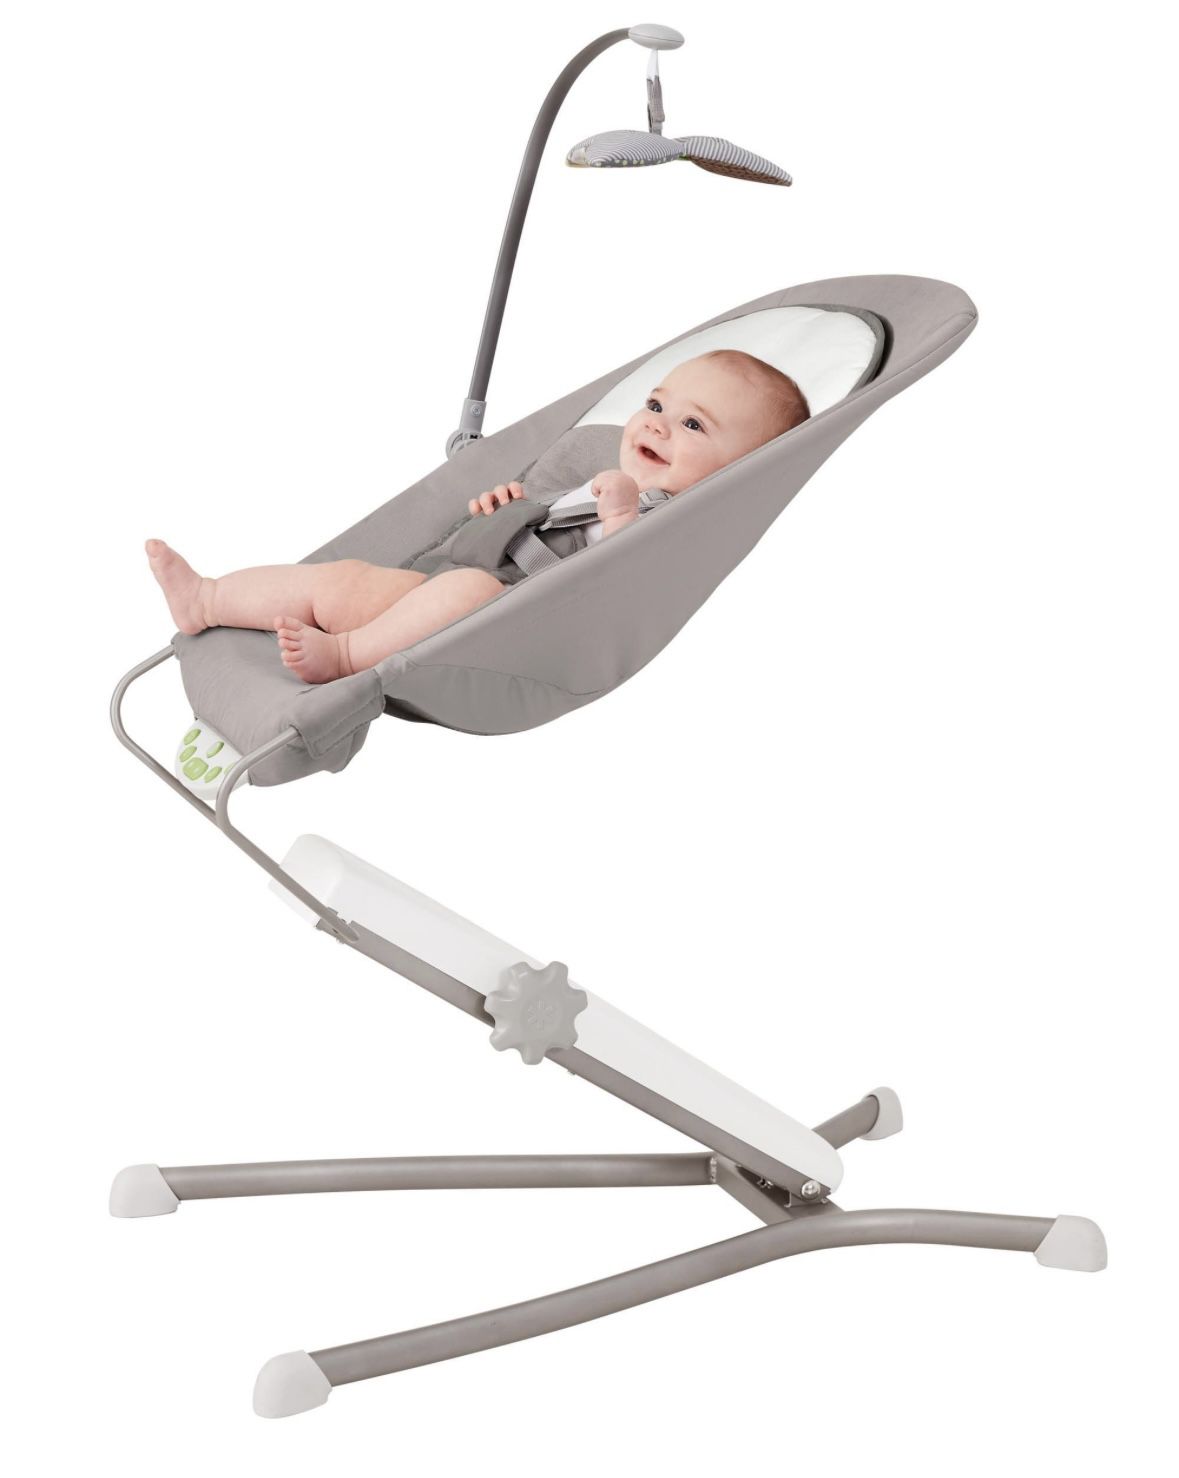 FREE Skip Hop Baby bouncer chair with sounds, vibration  